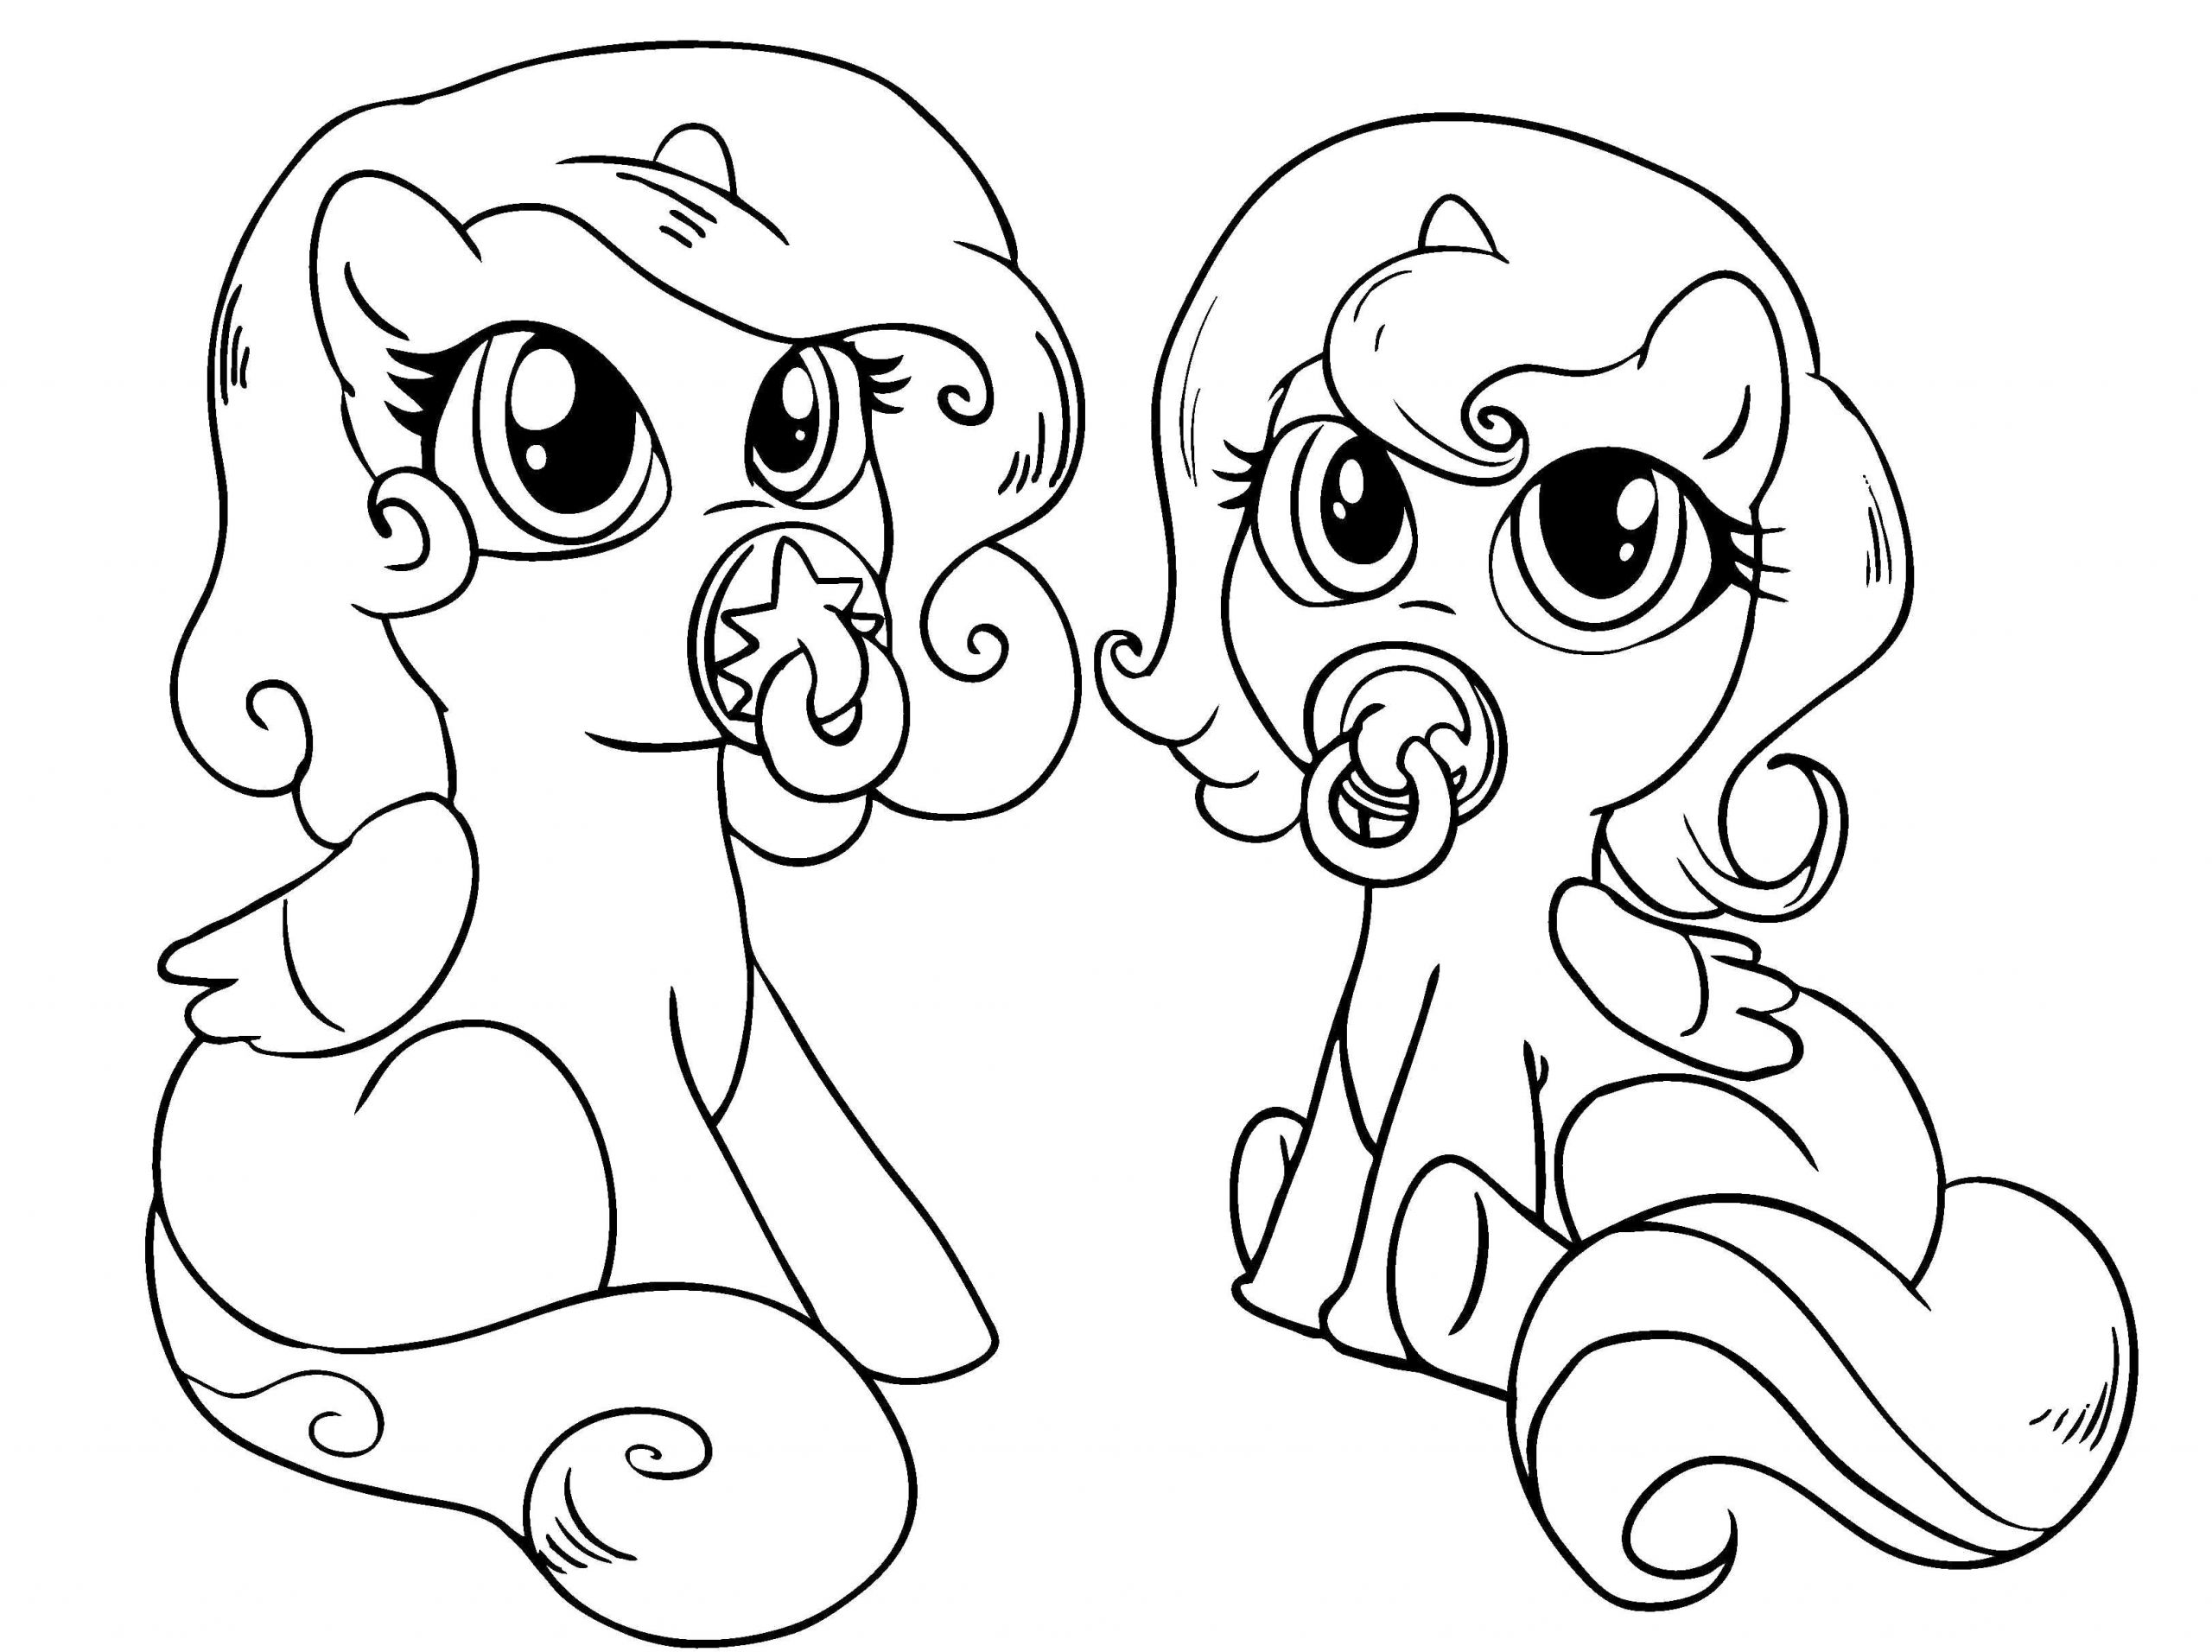 Baby Pony Coloring Pages
 Baby Little Pony Coloring Pages My Little Pony car